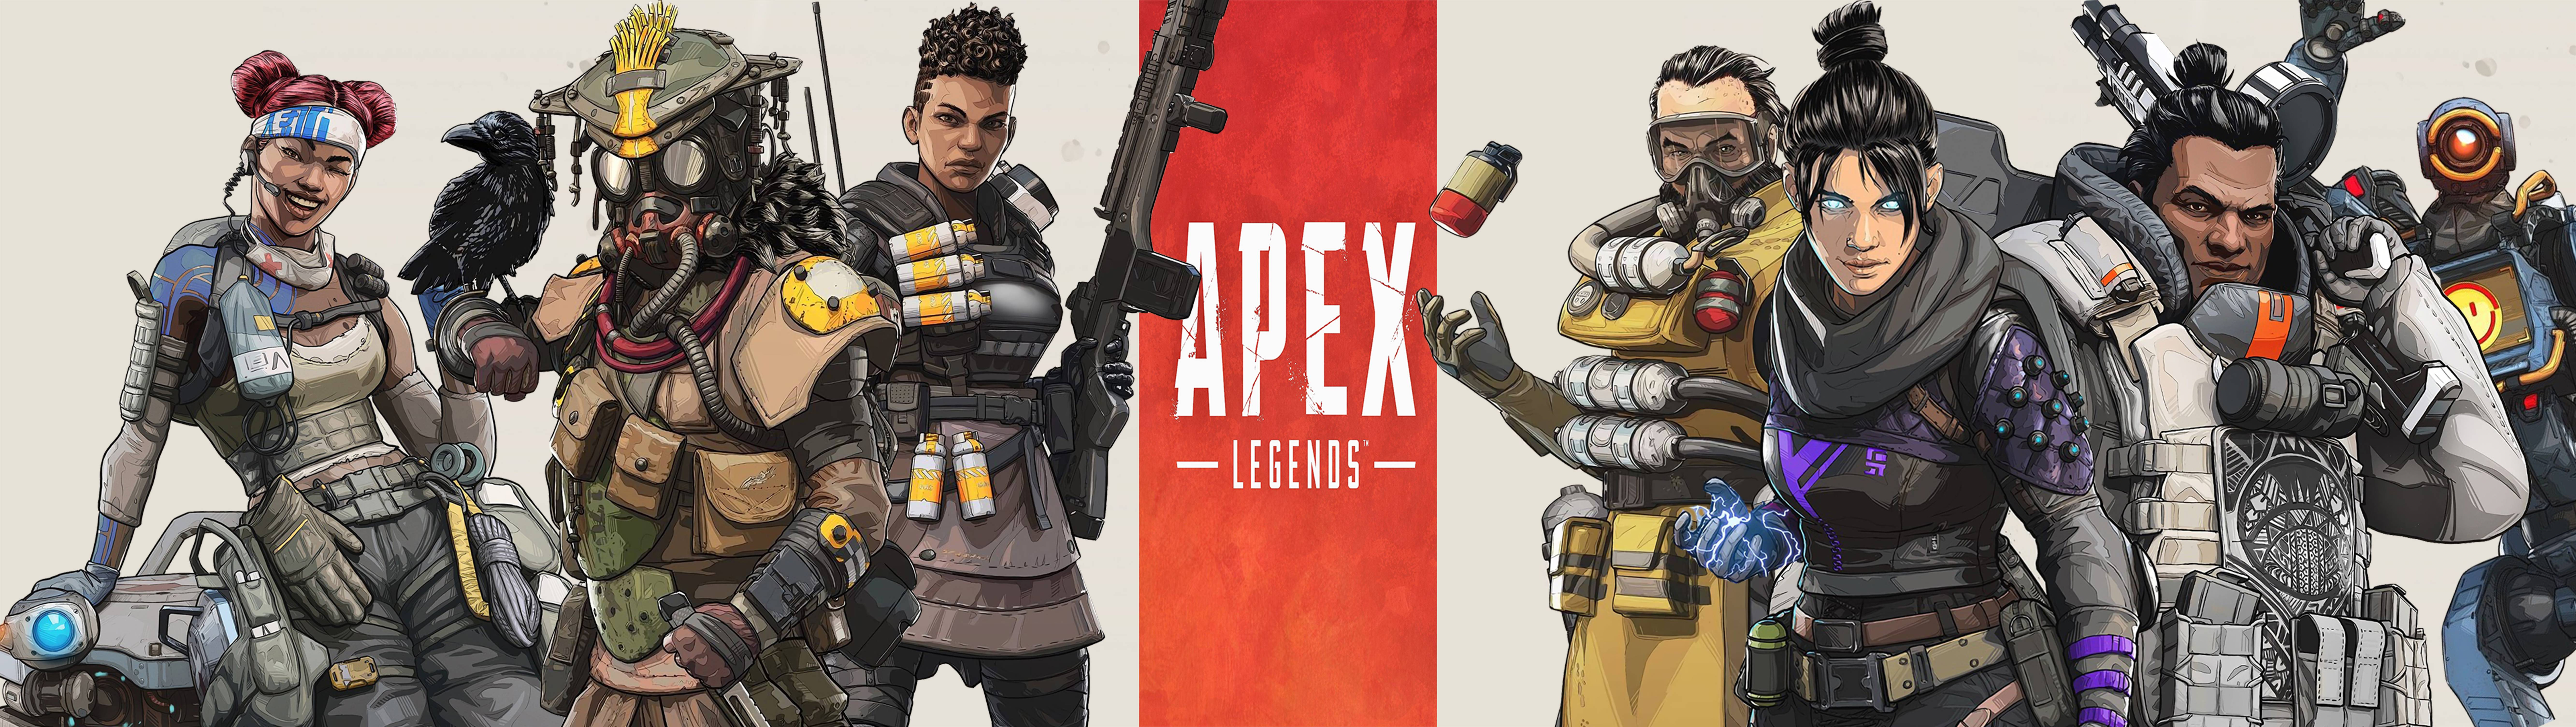 Apex Dual monitor wallpaper I made using the existing art